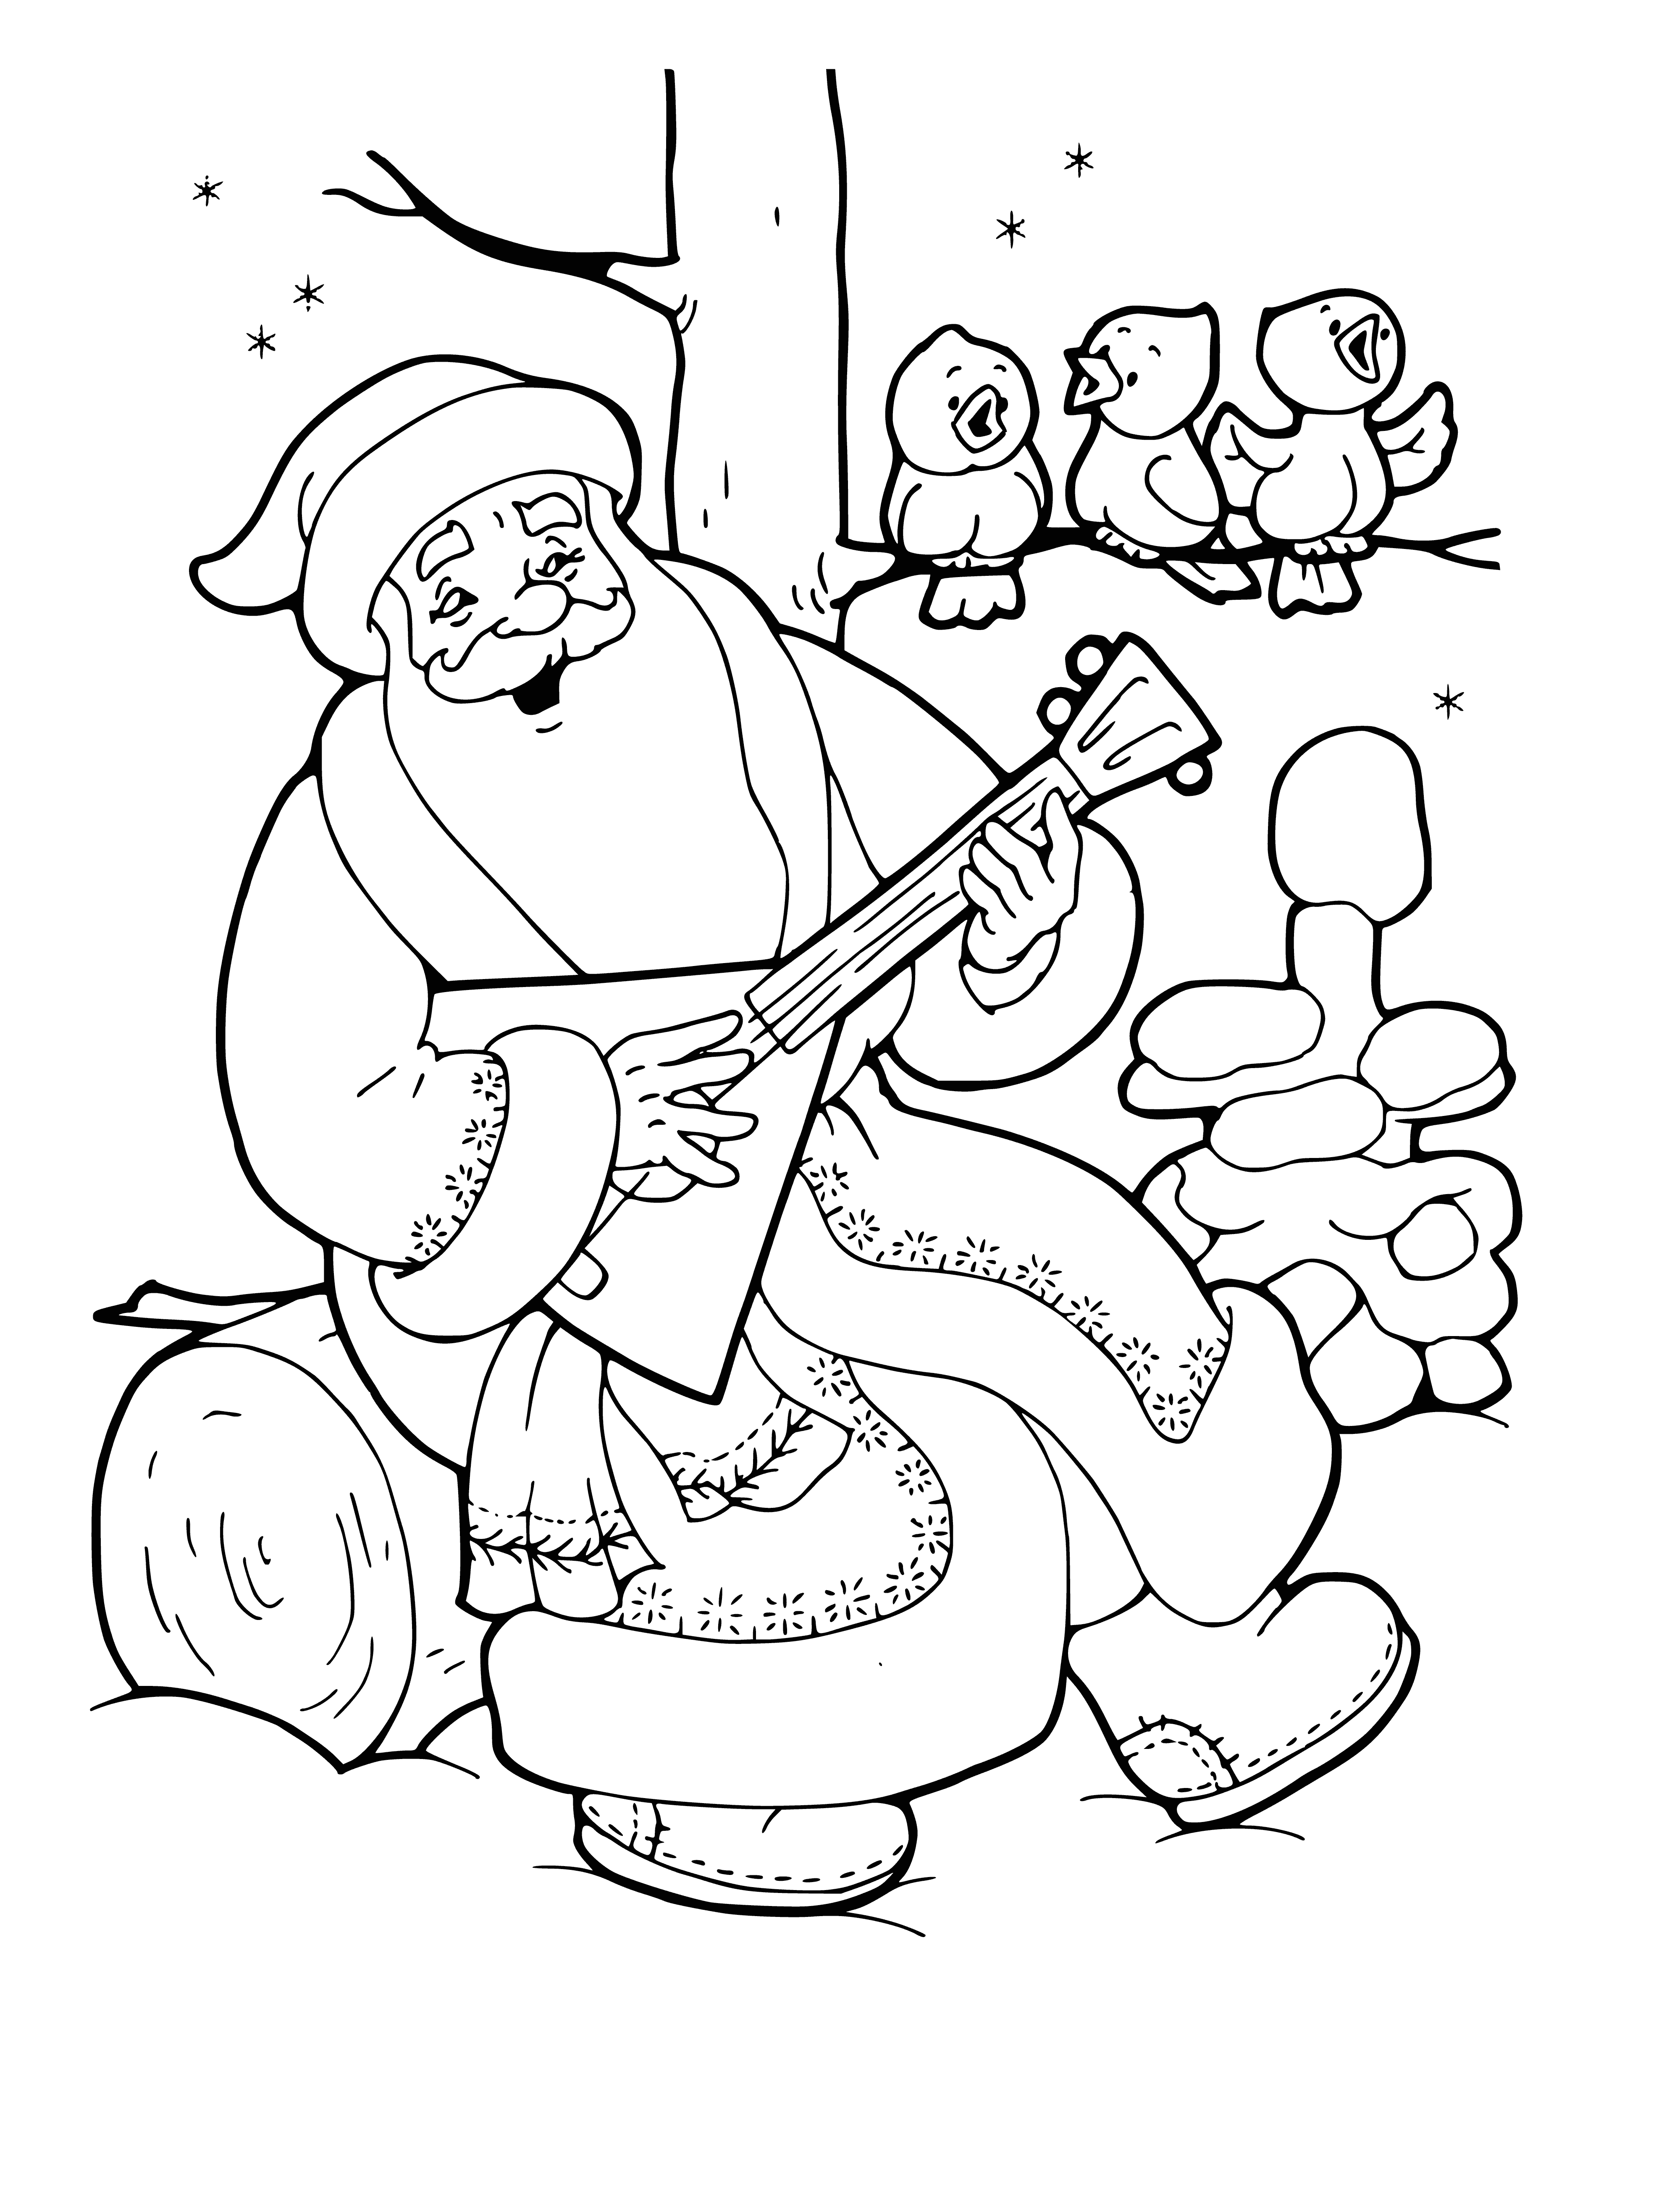 coloring page: Santa Claus plays balalaika in a red suit & hat, white beard - a jolly scene for holiday coloring! #coloring #SantaClaus